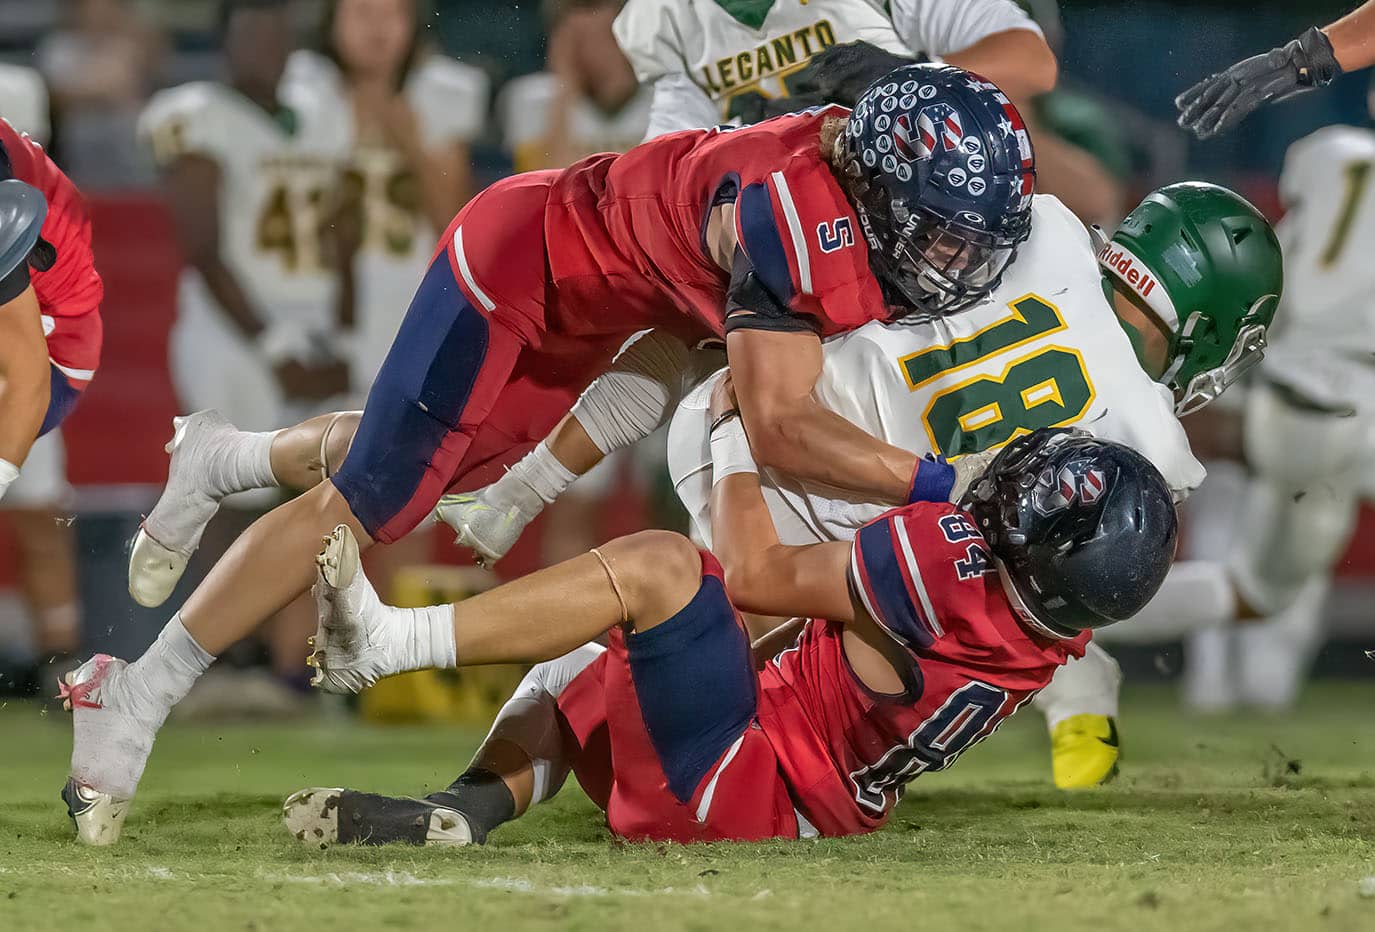 Madden Baratczuk, 5, and 84, Brenden Hoepker wrap up the Lecanto QB during the first half Friday at Springstead High.Photo by JOE DiCRISTOFALO.